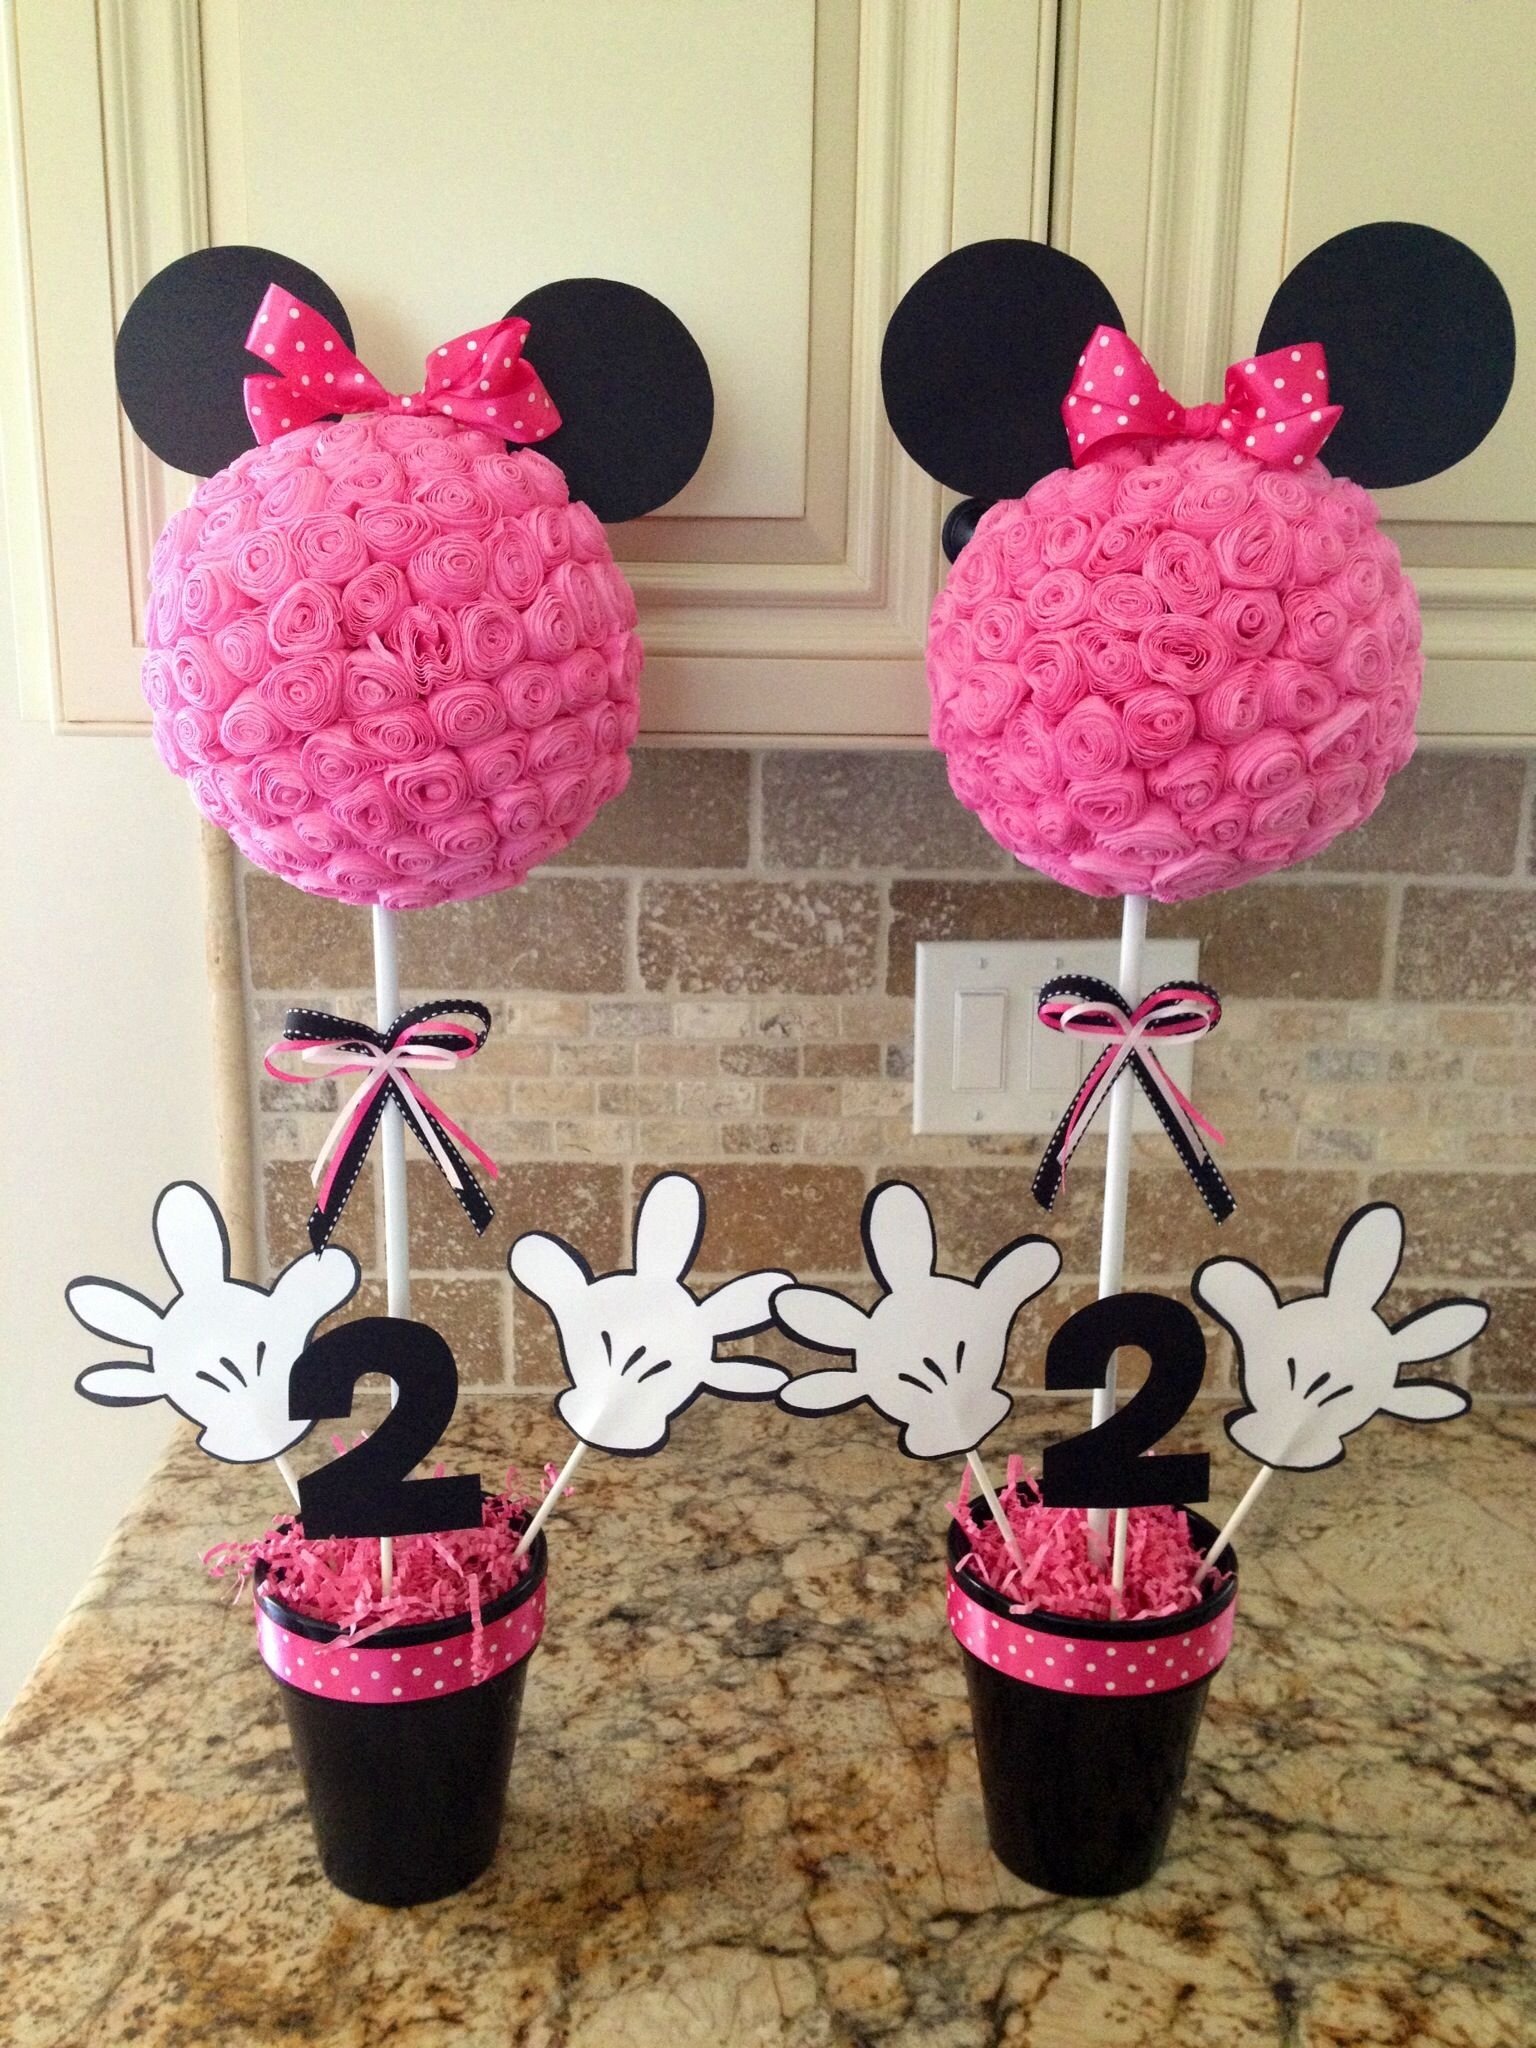 10 Lovable Minnie Mouse Birthday Party Ideas minnie mouse centerpieces minnie mouse pinterest minnie mouse 6 2022